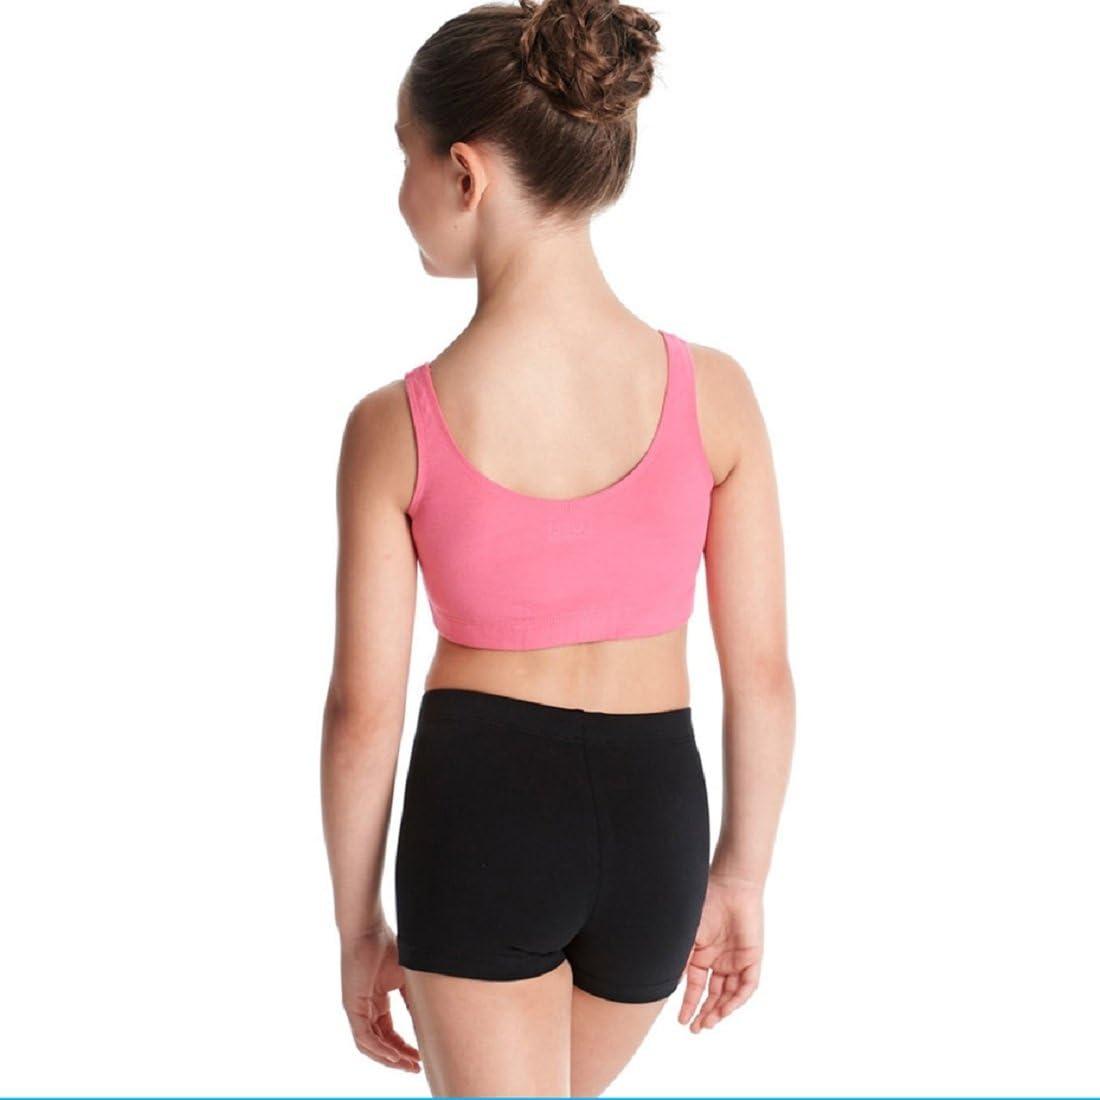 Girls Dance Shorts Bike Shorts ​Breathable and Safety Active Under Dress  Shorts for Playgrounds Yoga and Gymnastics